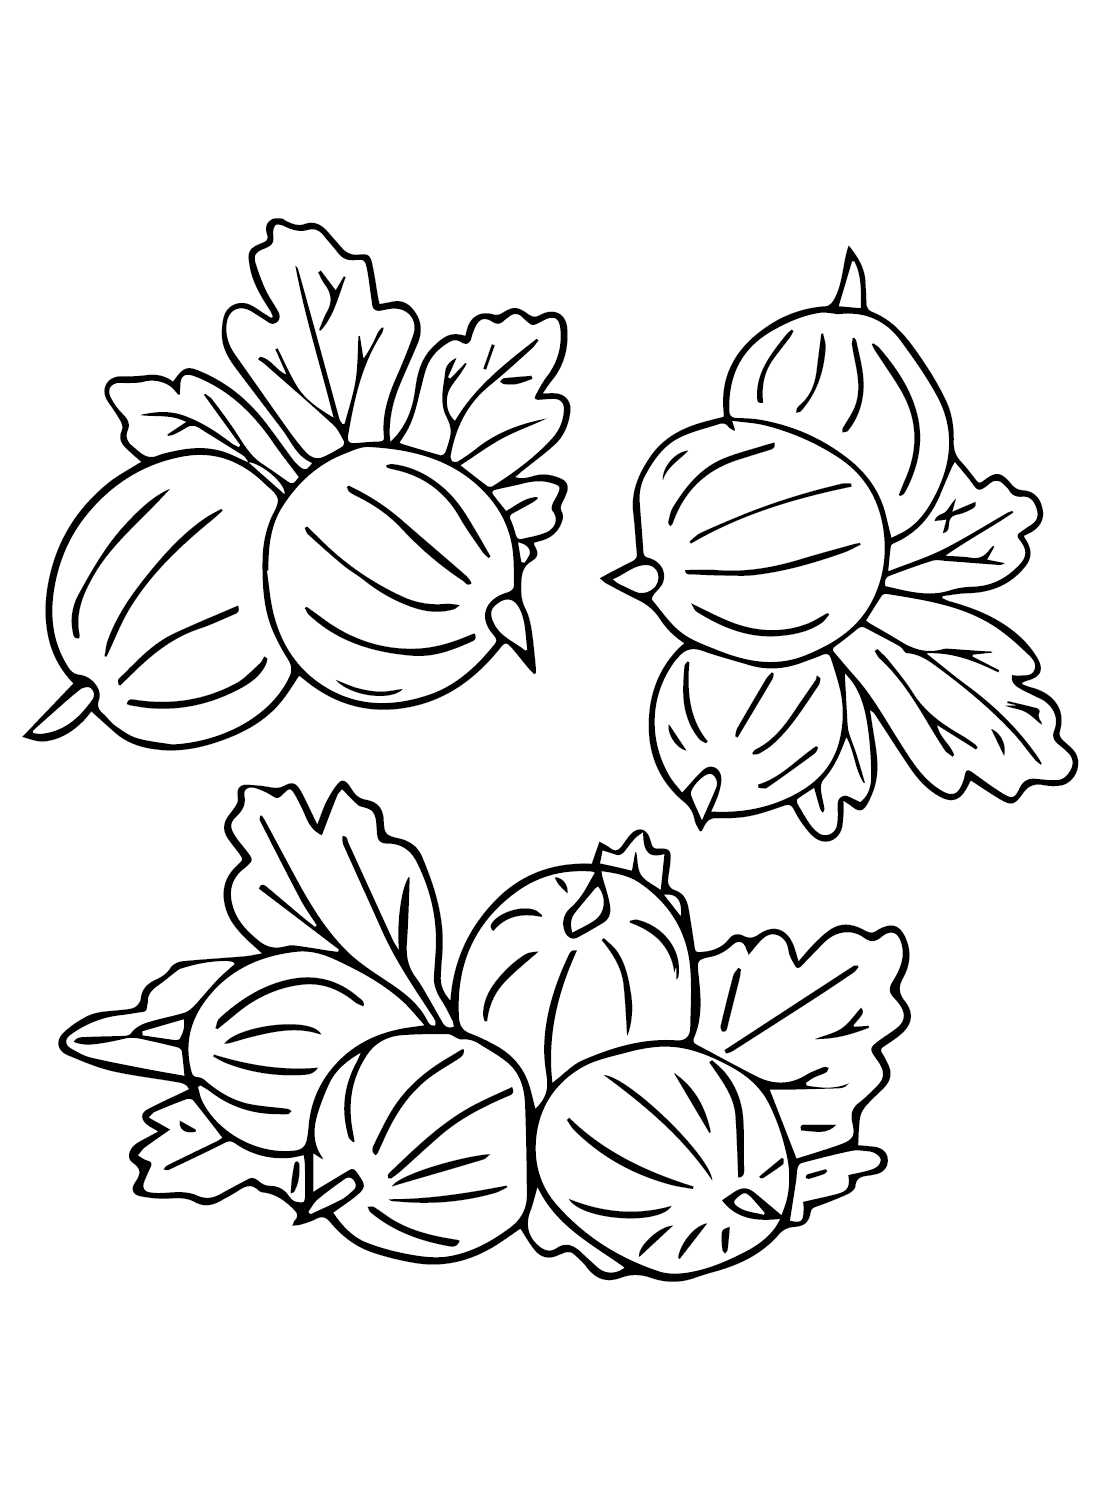 Gooseberries Coloring Page